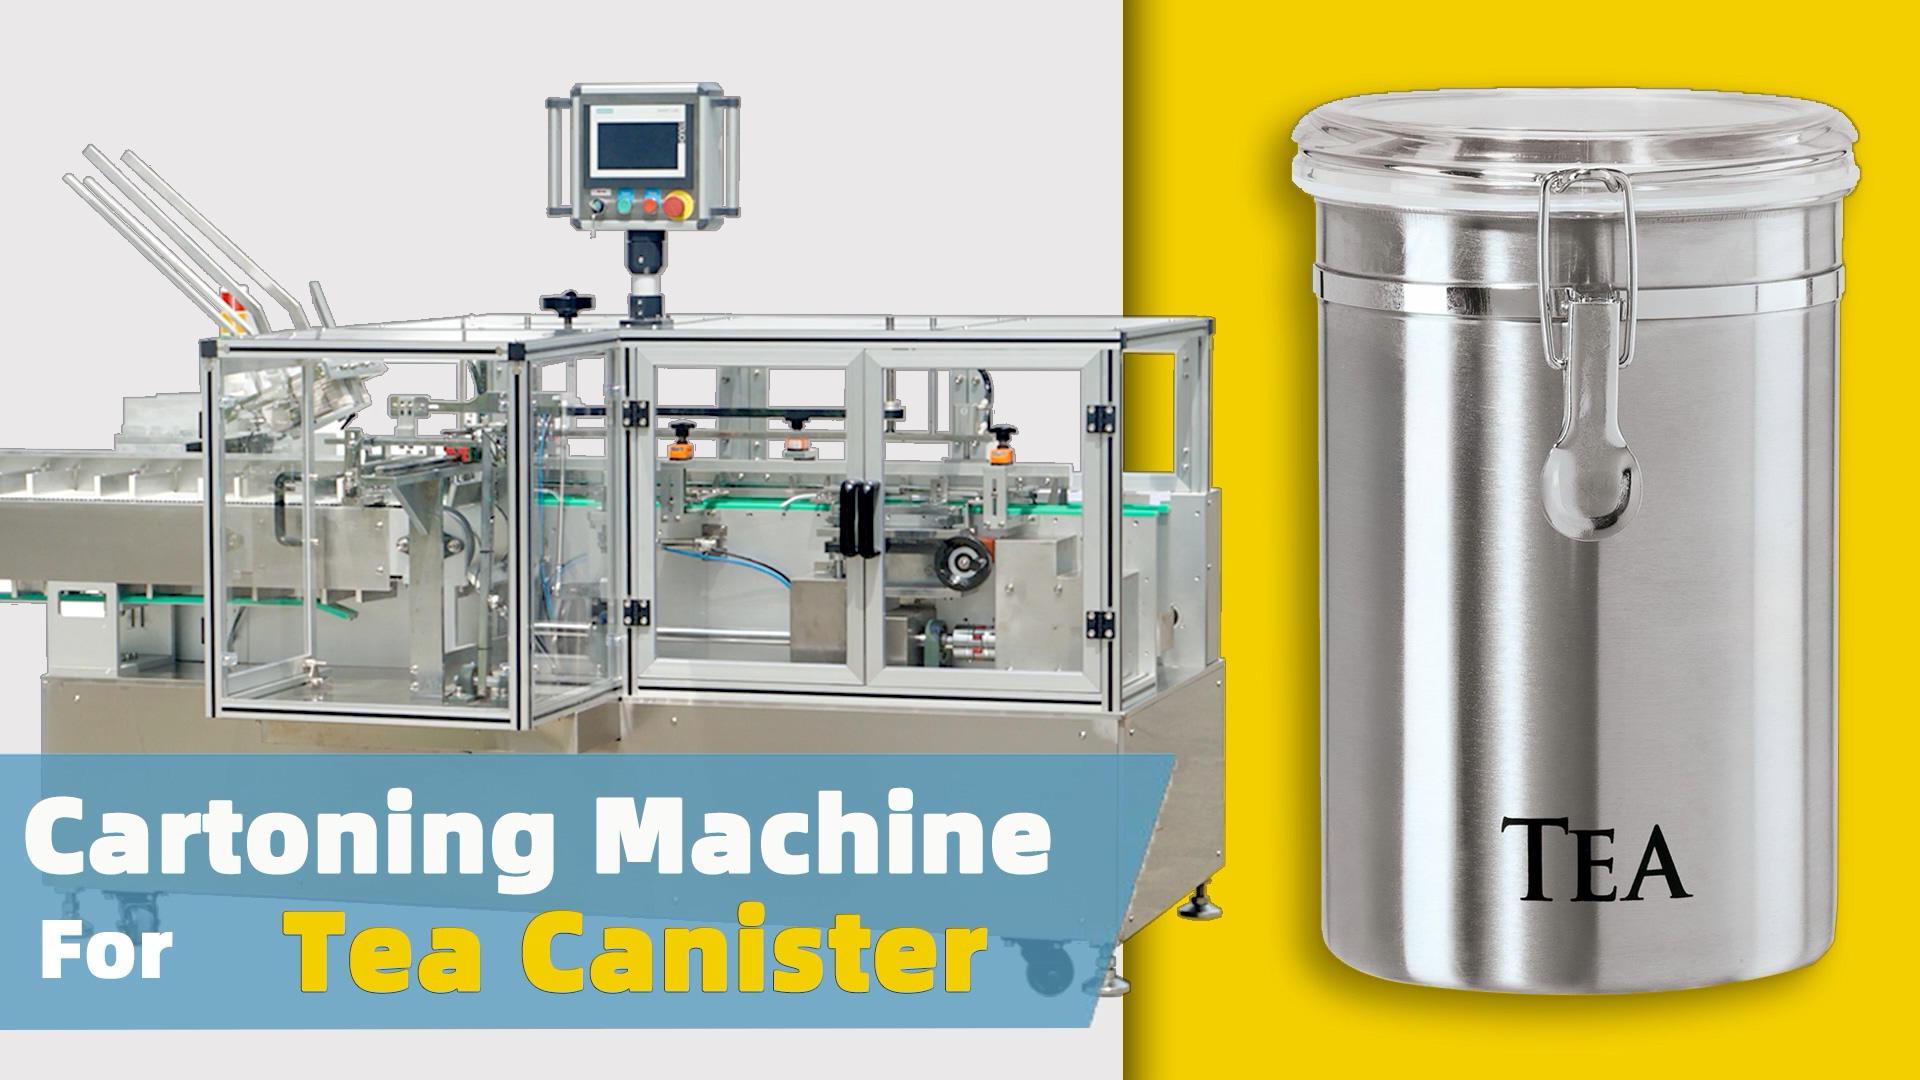 Automatic Cartoning Machine for Tea Canister Set/Tea Canister Tet/Coffee Sugar Tea Canister Set